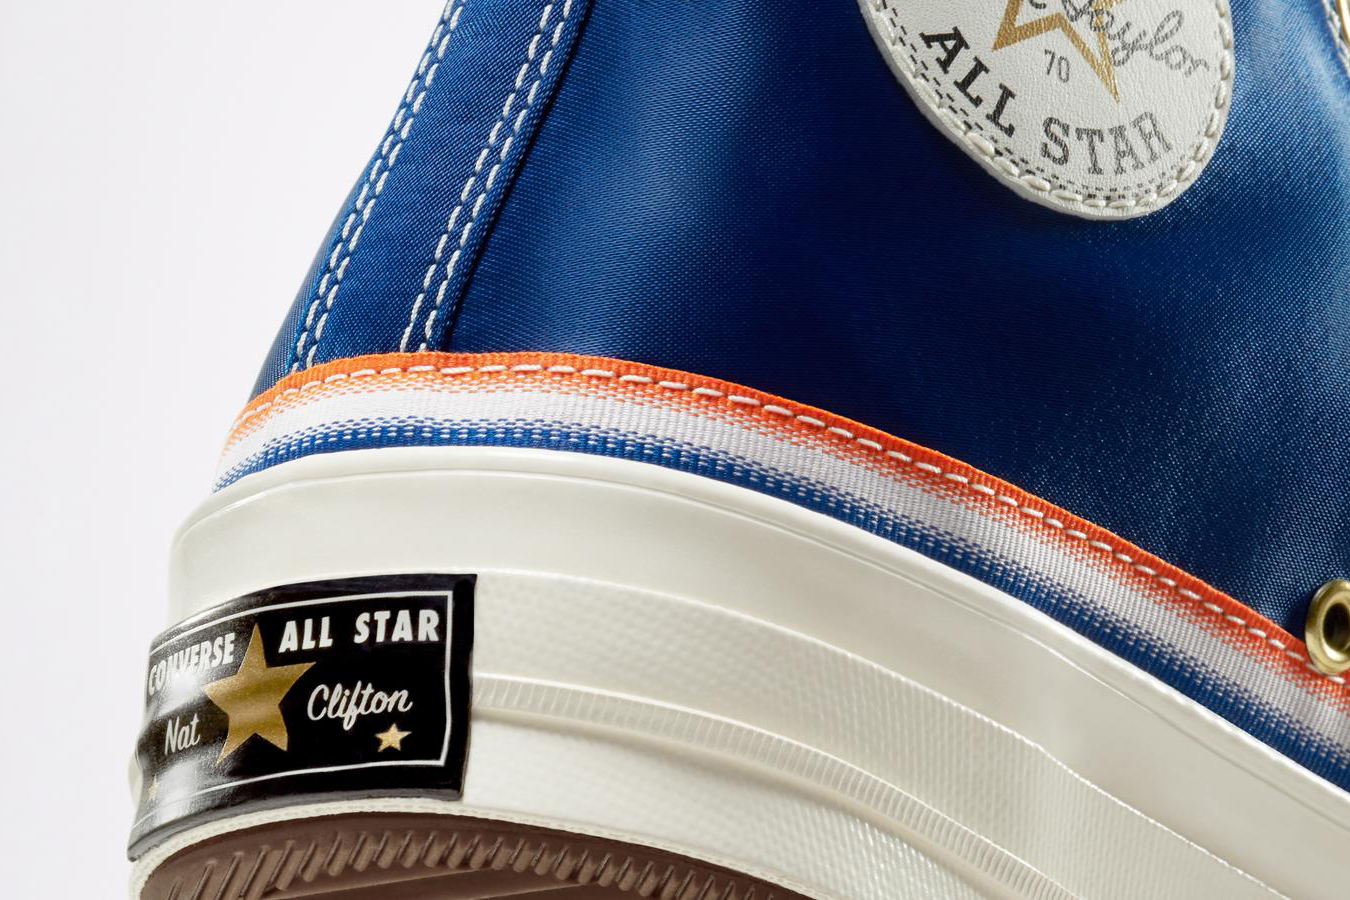 Release 21 Jul] Break Down Barriers in an All-New Converse Collab